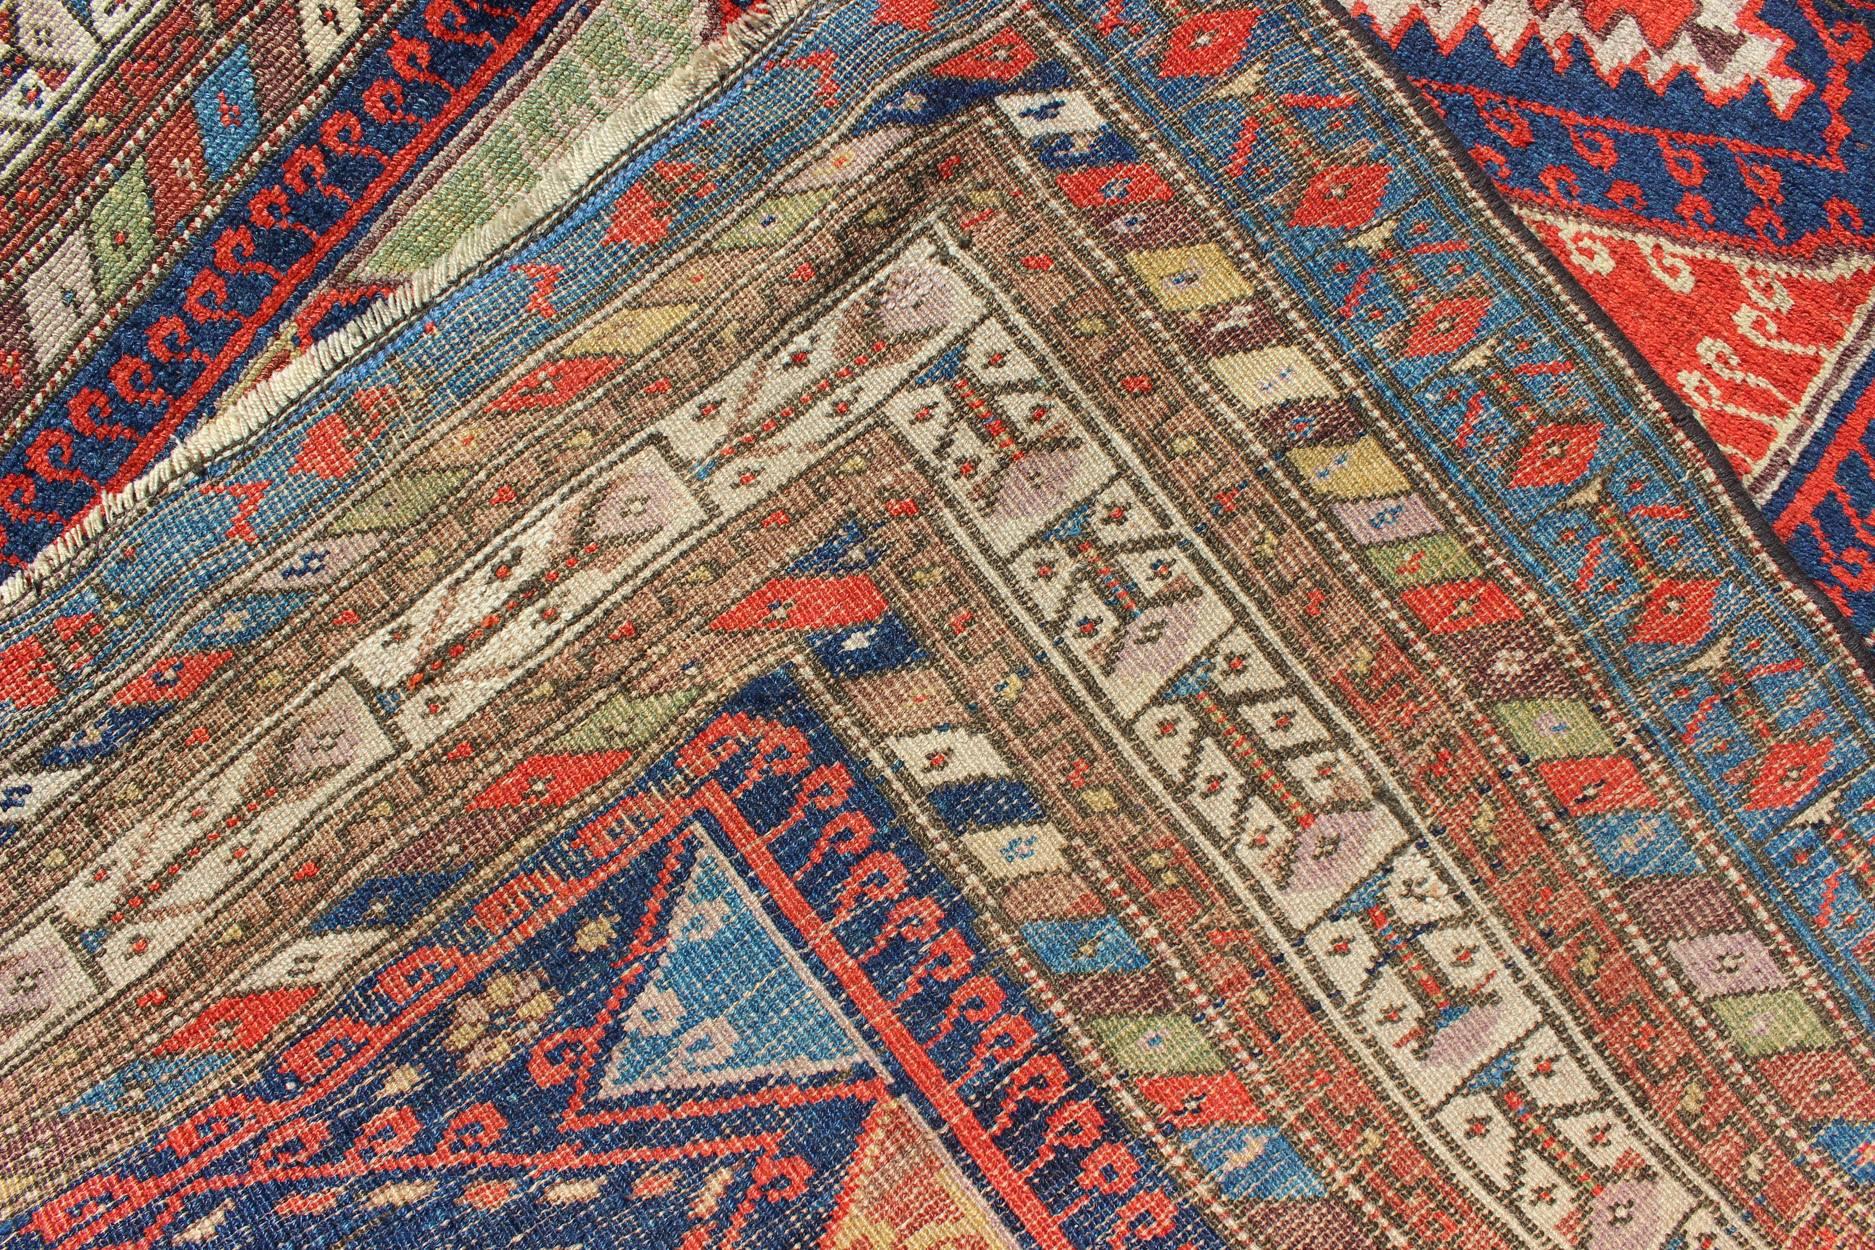 Wool Antique Kurdish Kazak with Tribal and Geometric Motifs In Blue, red & Green For Sale